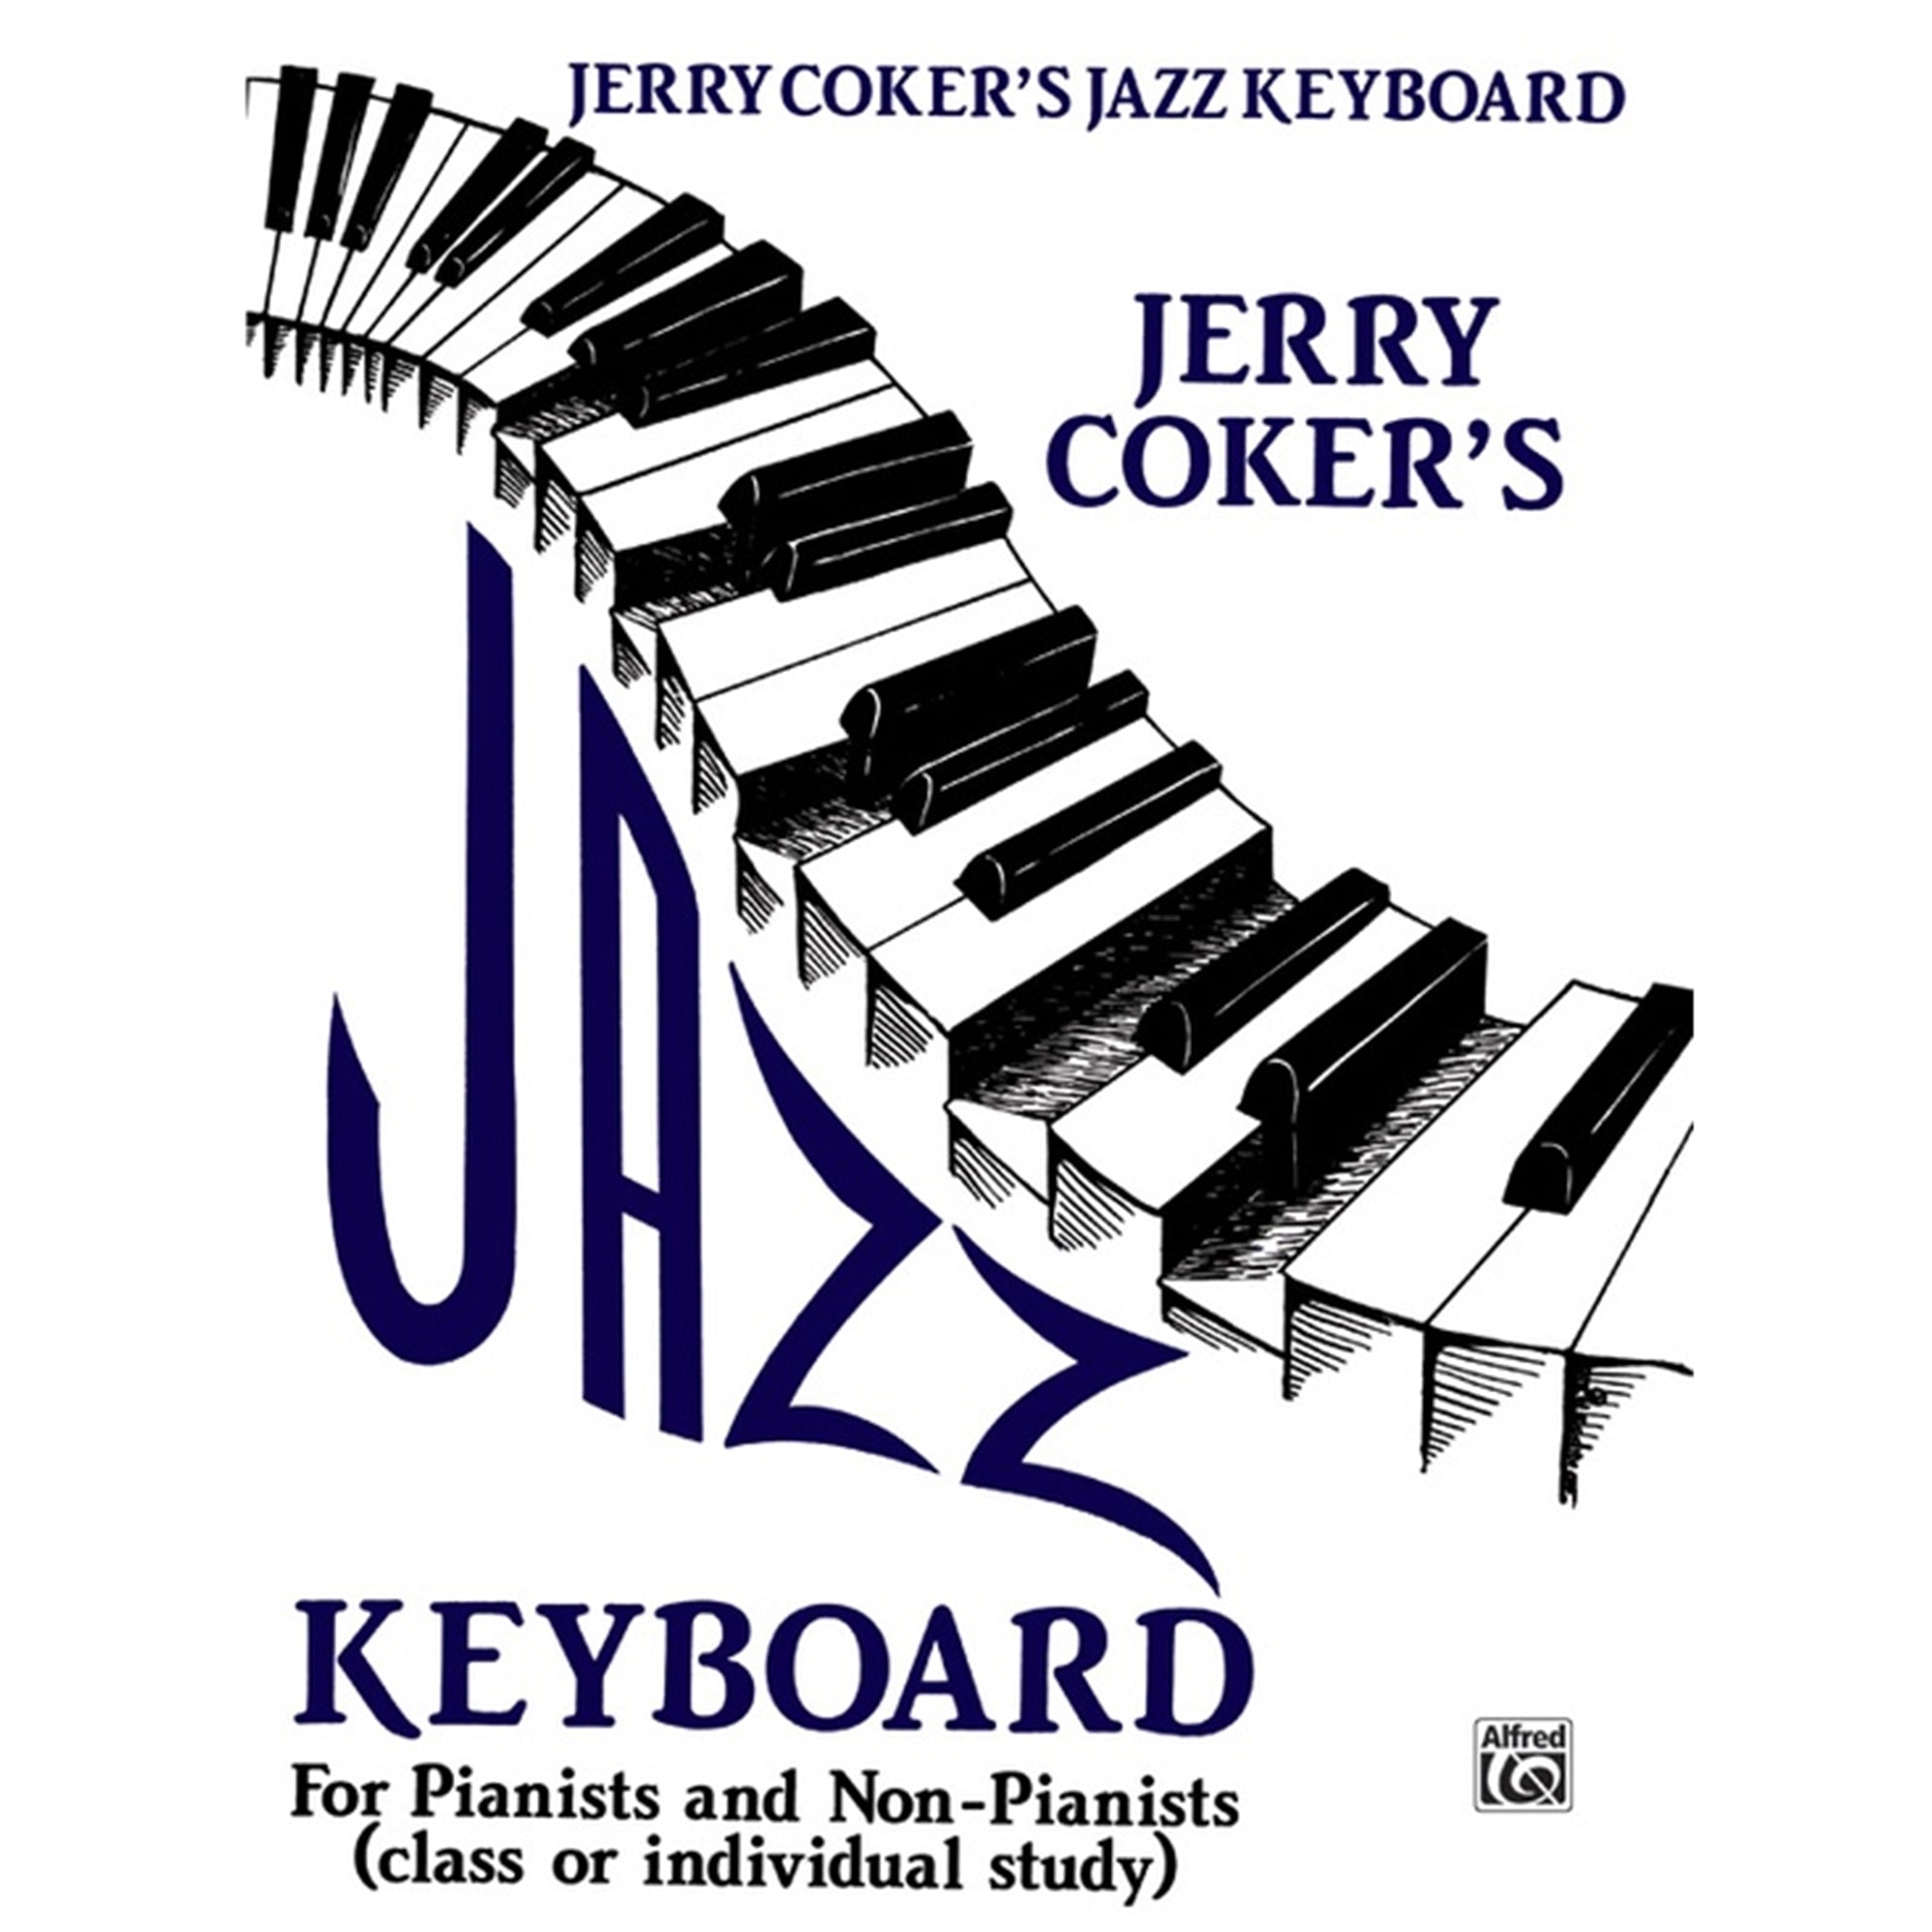 ALFRED 00SB248 Jazz Keyboard for Pianists and Non-Pianists